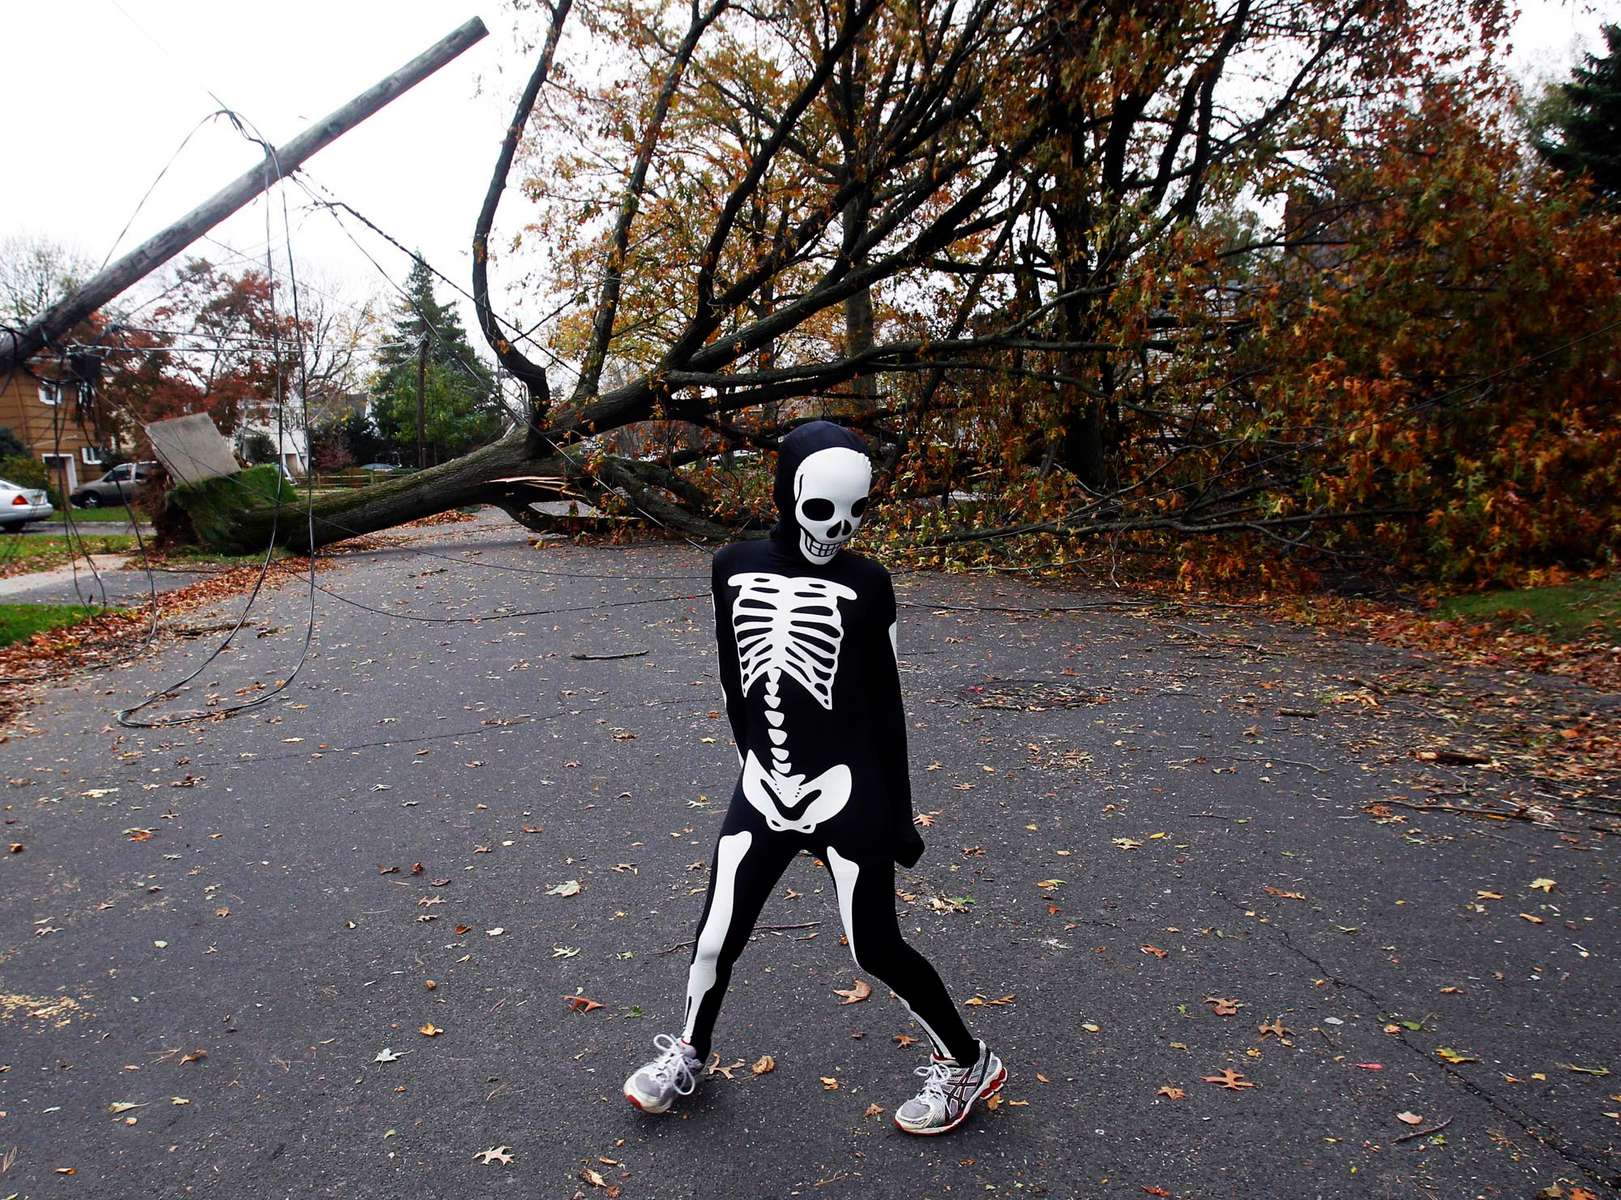 Aidan Christman, 10 of Scotch Plains plays in his Halloween costume on Montague Street to celebrate Halloween with neighbors after Hurricane Sandy in Scotch Plains.  Trick or Treating was cancelled due to the hurricane. 